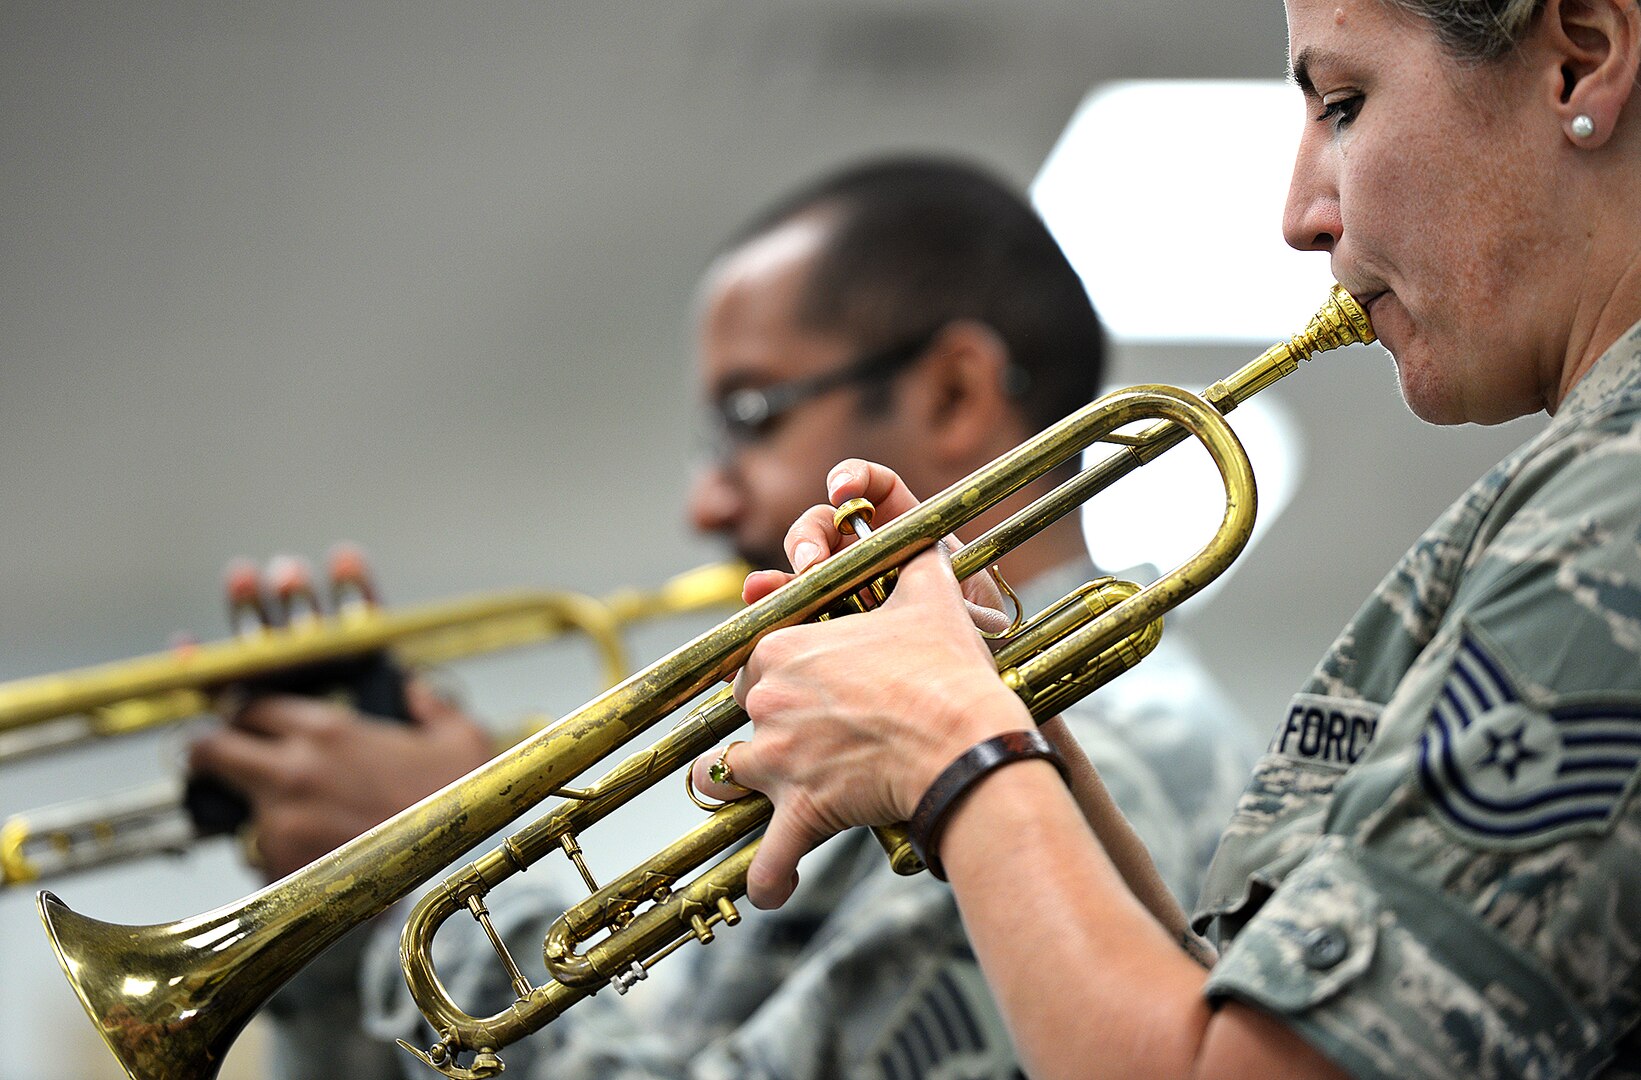 Tech Sgt. Amy Moran, United States Air Force Band of the West trumpetist, practices April 9 for the upcoming Fiesta in Blue concert at Joint Base San Antonio-Lackland. (U.S. Air Force photos by Benjamin Faske)